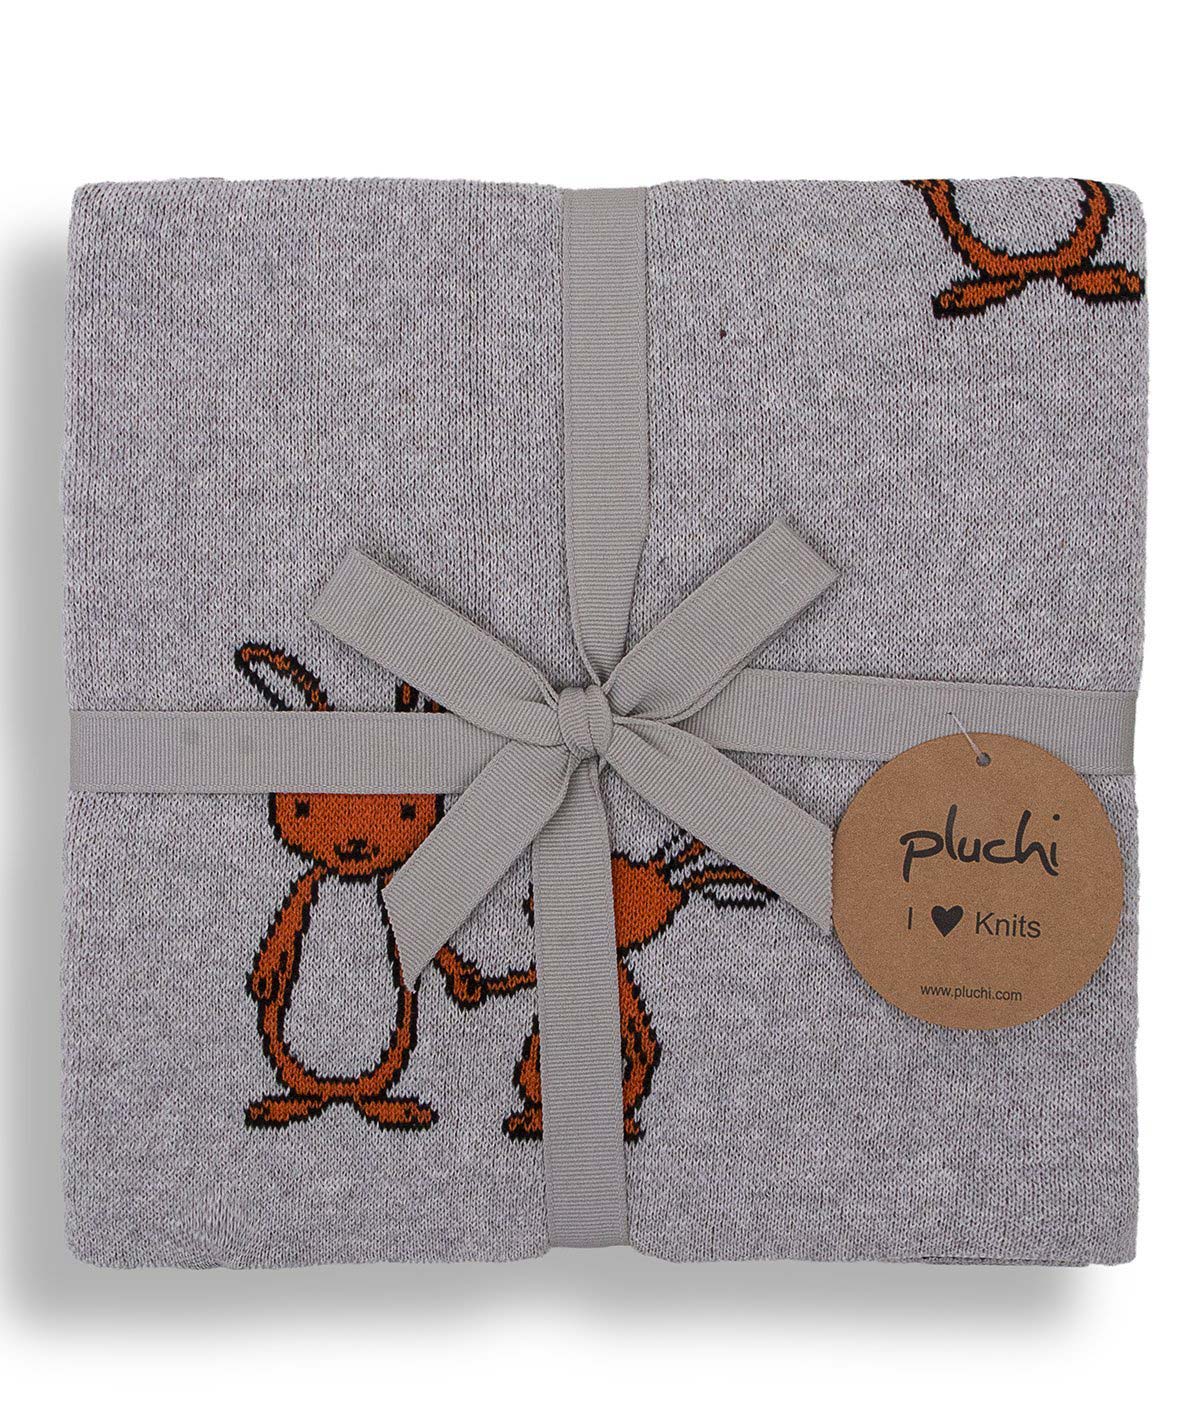 Mumma and Baby Bunny Grey 100% Cotton Knitted All Seasons AC Blanket for Babies